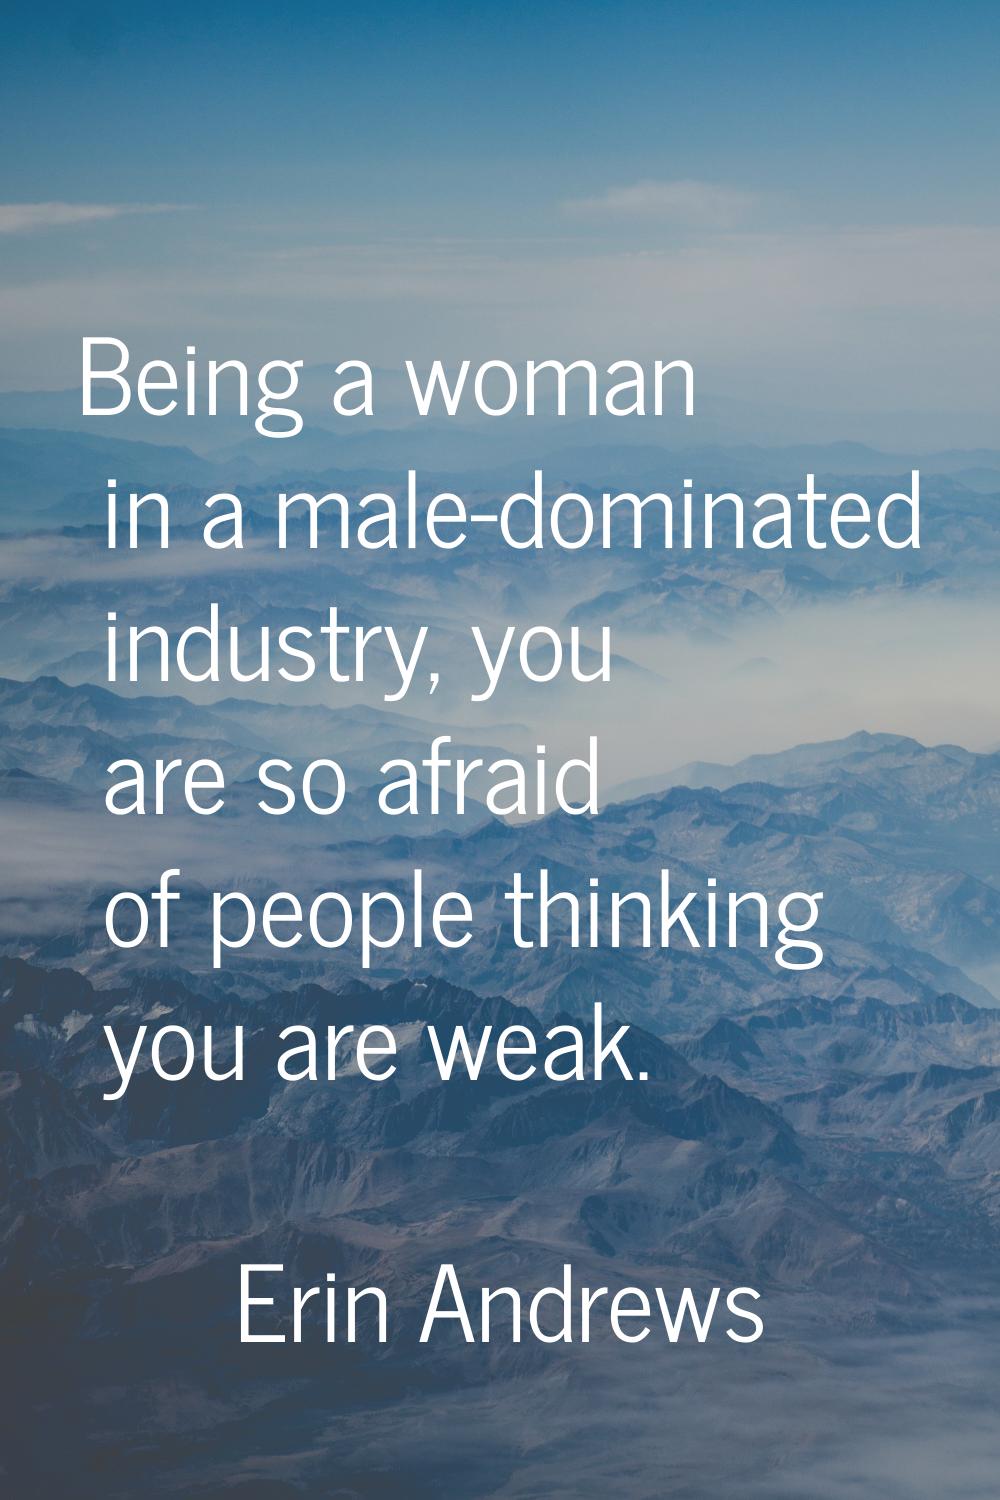 Being a woman in a male-dominated industry, you are so afraid of people thinking you are weak.